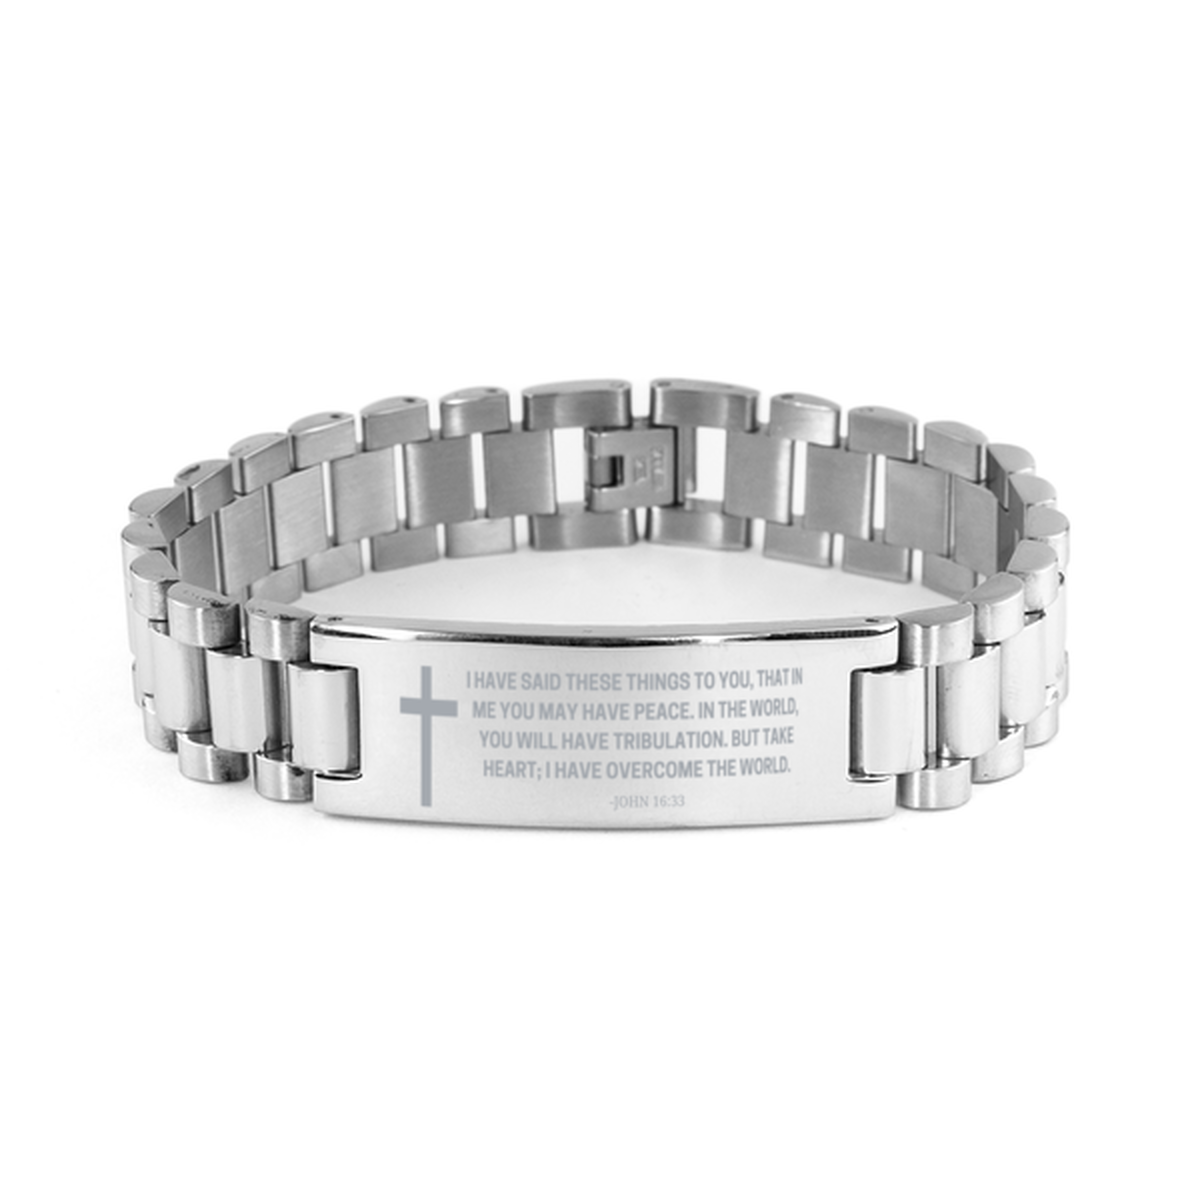 Baptism Gifts For Teenage Boys Girls, Christian Bible Verse Ladder Stainless Steel Bracelet, I have said these things, Catholic Confirmation Gifts for Son, Godson, Grandson, Nephew